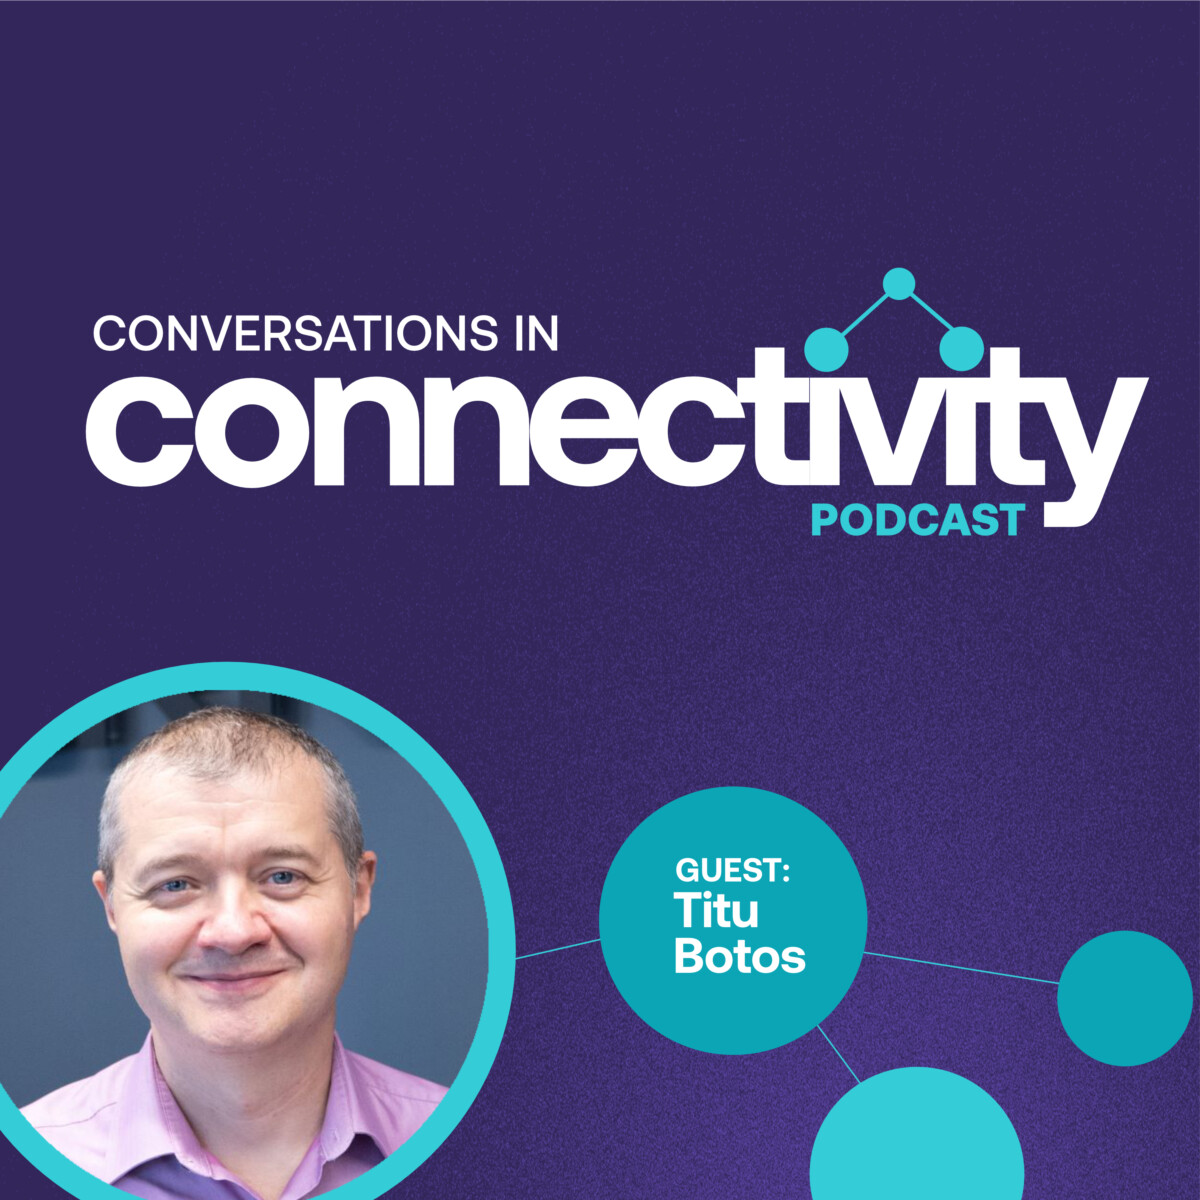 Conversations in Connectivity Podcast – Episode 4: Critical Design Considerations for IoT Devices